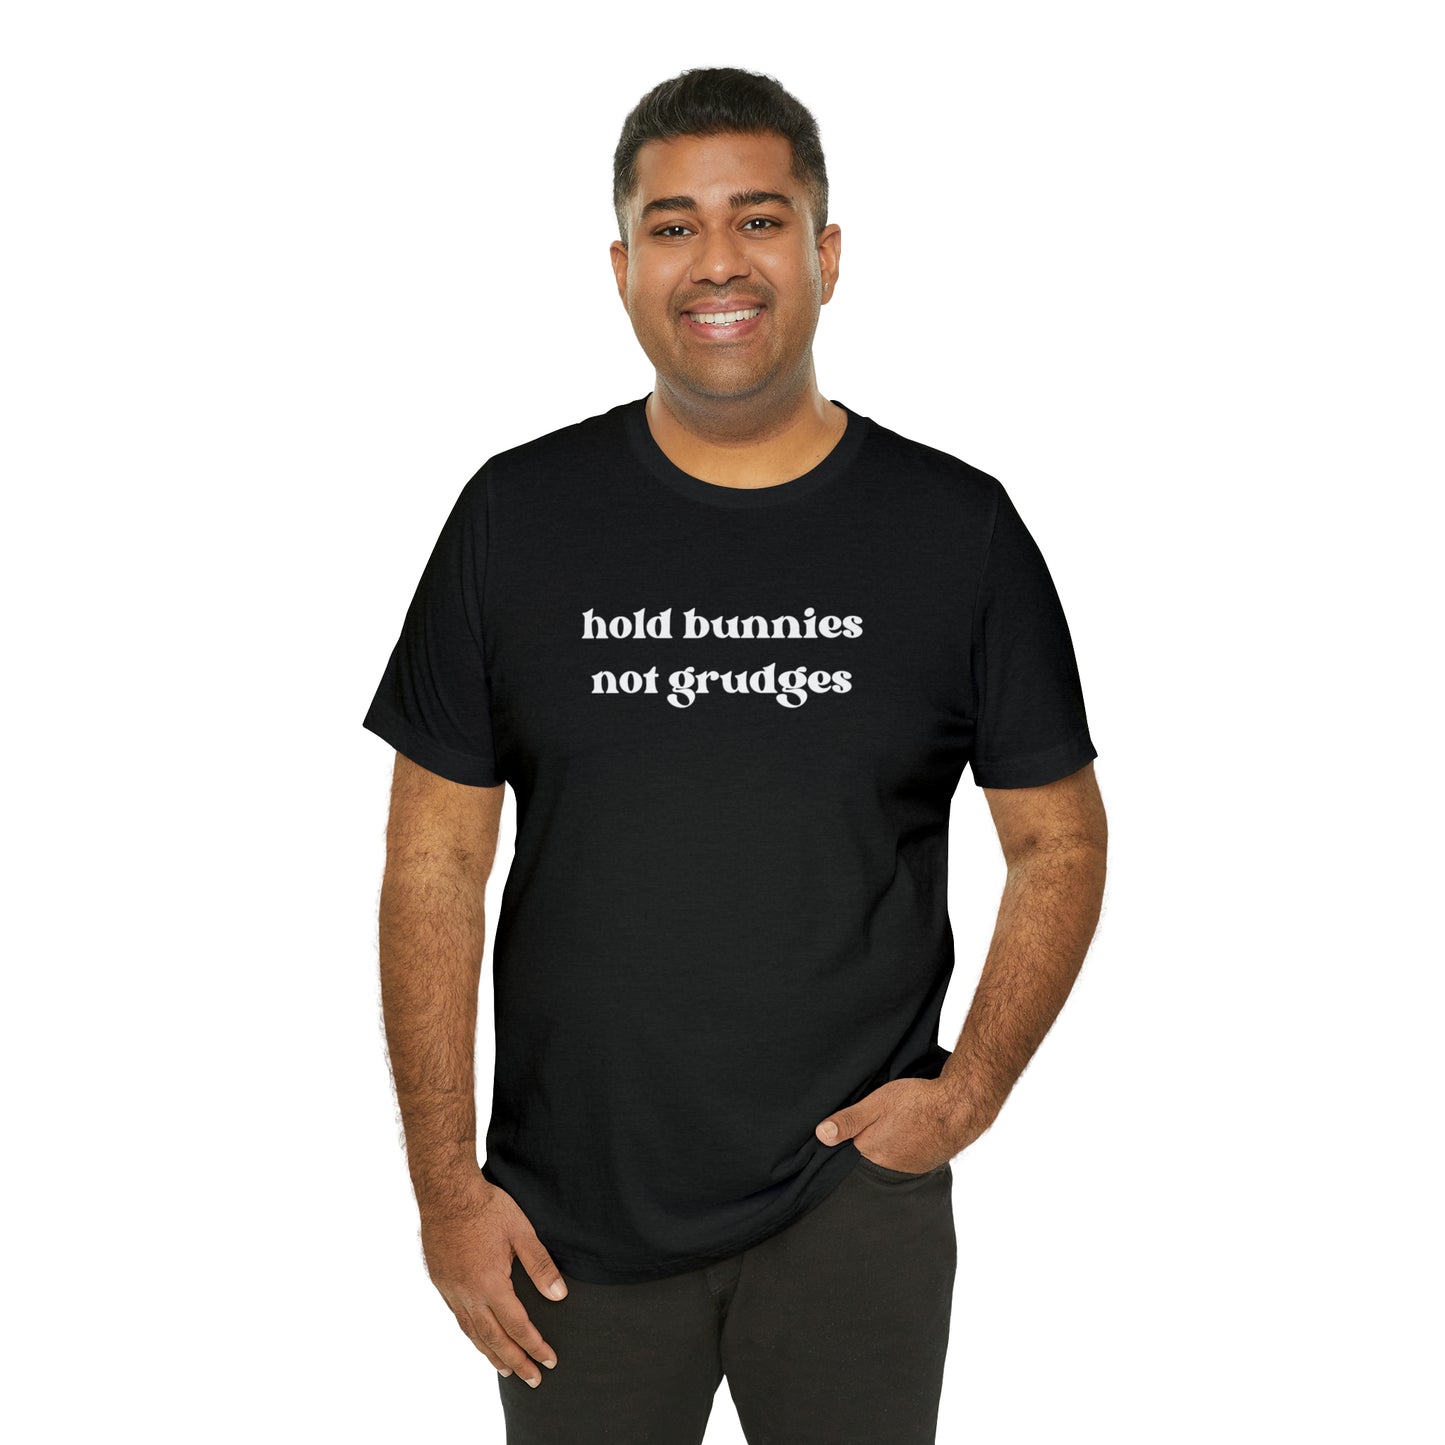 Hold Bunnies, Not Grudges Tee